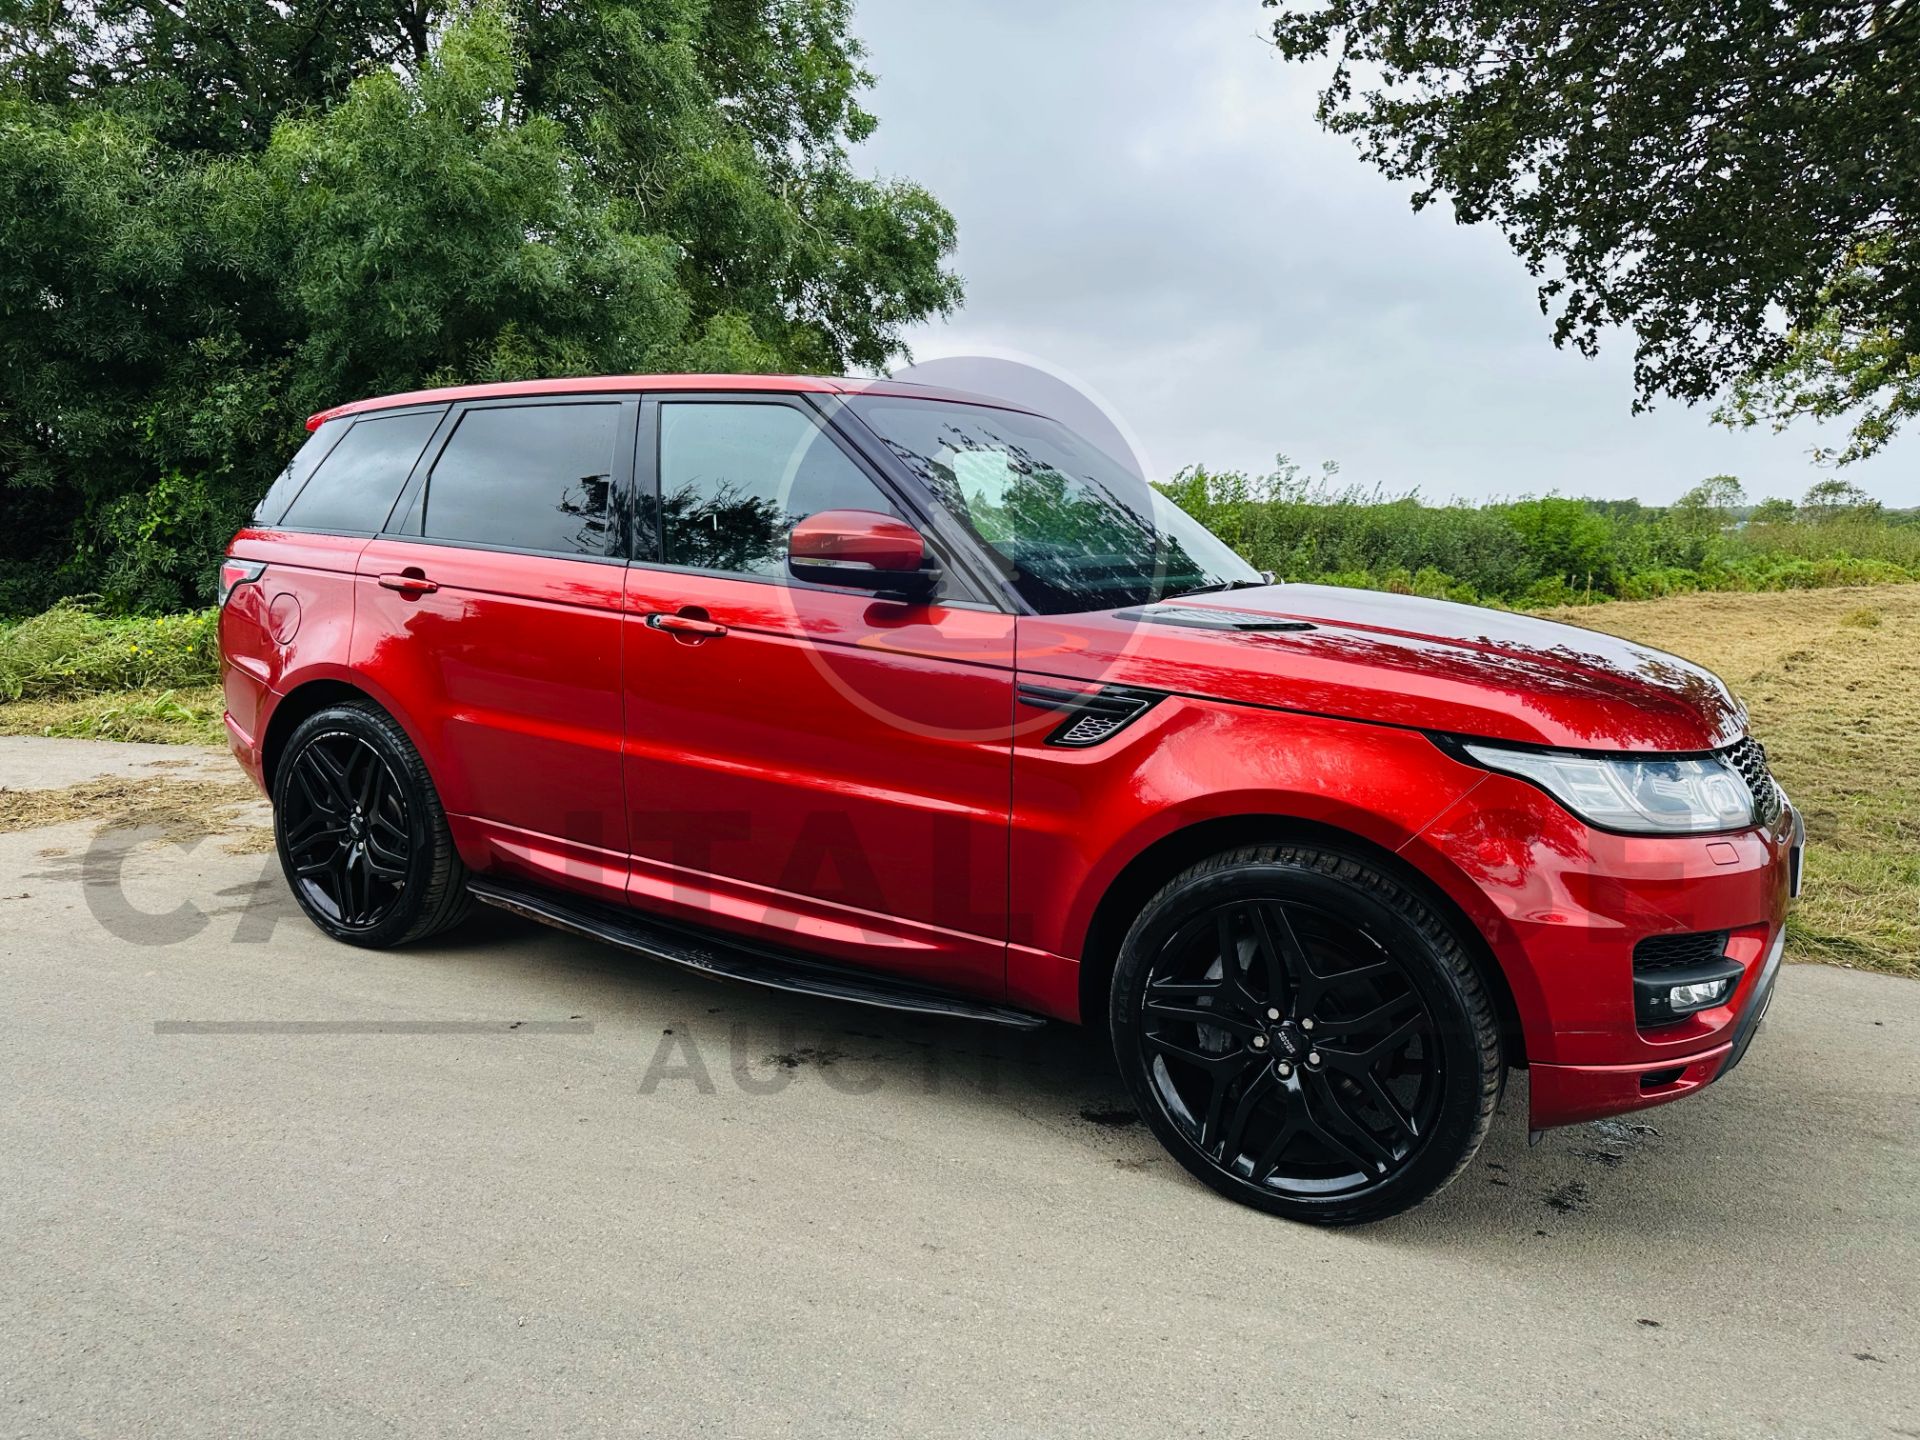 (On Sale) RANGE ROVER SPORT *HSE EDTION* 7 SEATER SUV (2014) 3.0 SDV6 - 8 SPEED AUTOMATIC (NO VAT)